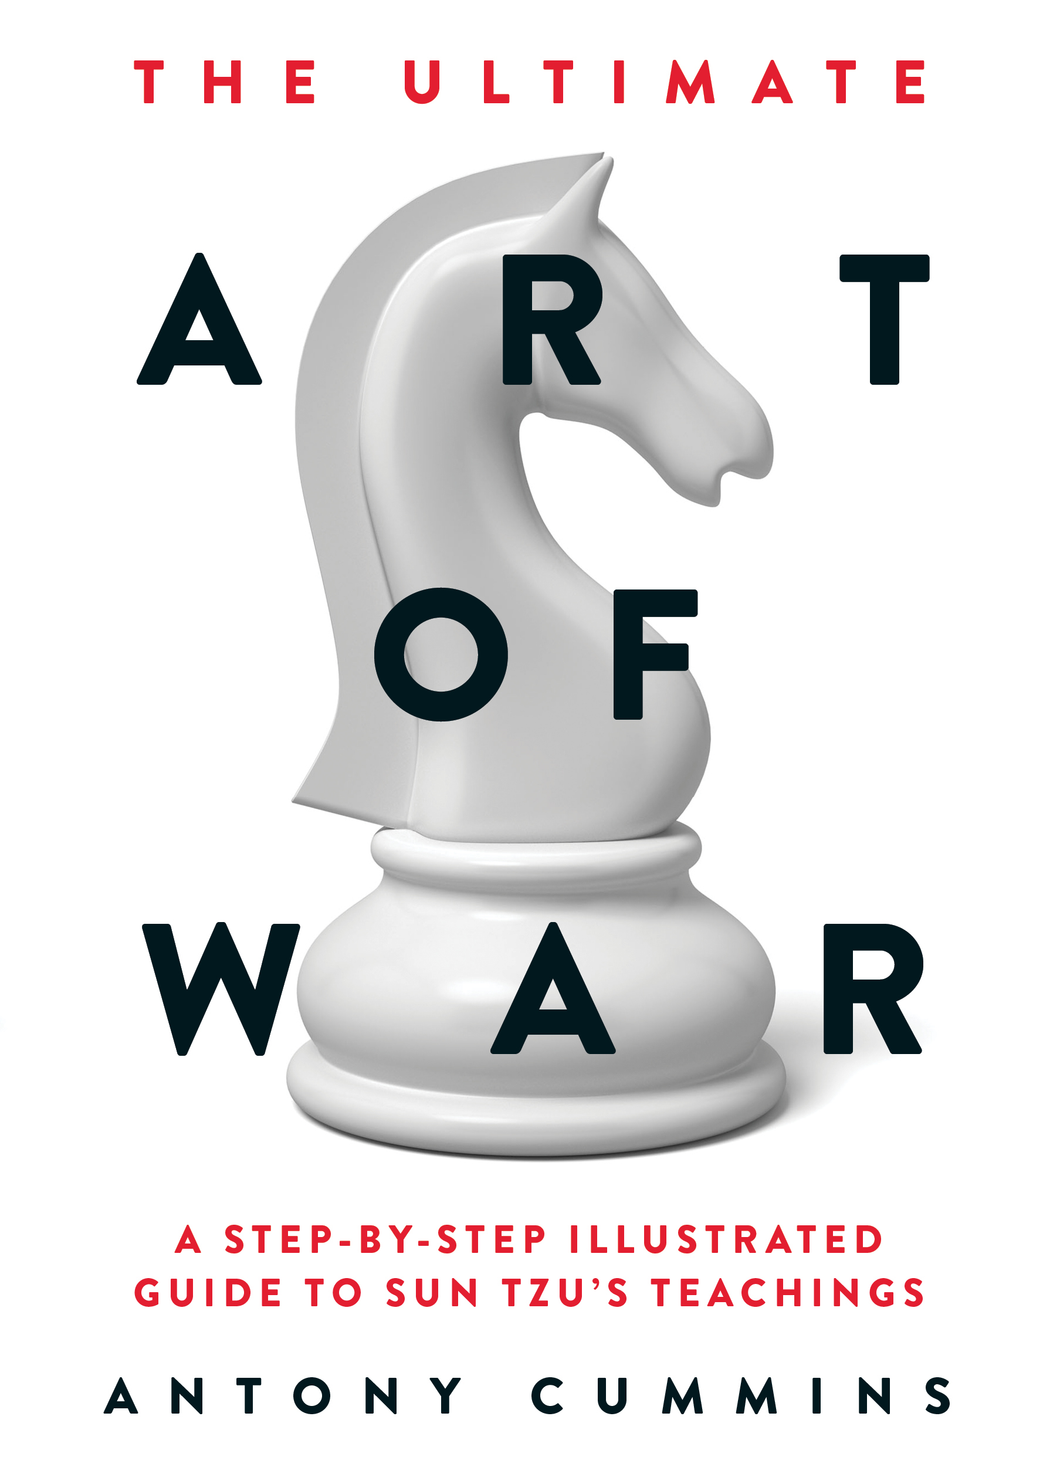 The Ultimate Art of War: A Step-by-Step Illustrated Guide to Sun Tzu's Teachings. By Antony Cummins (HARDCOVER)